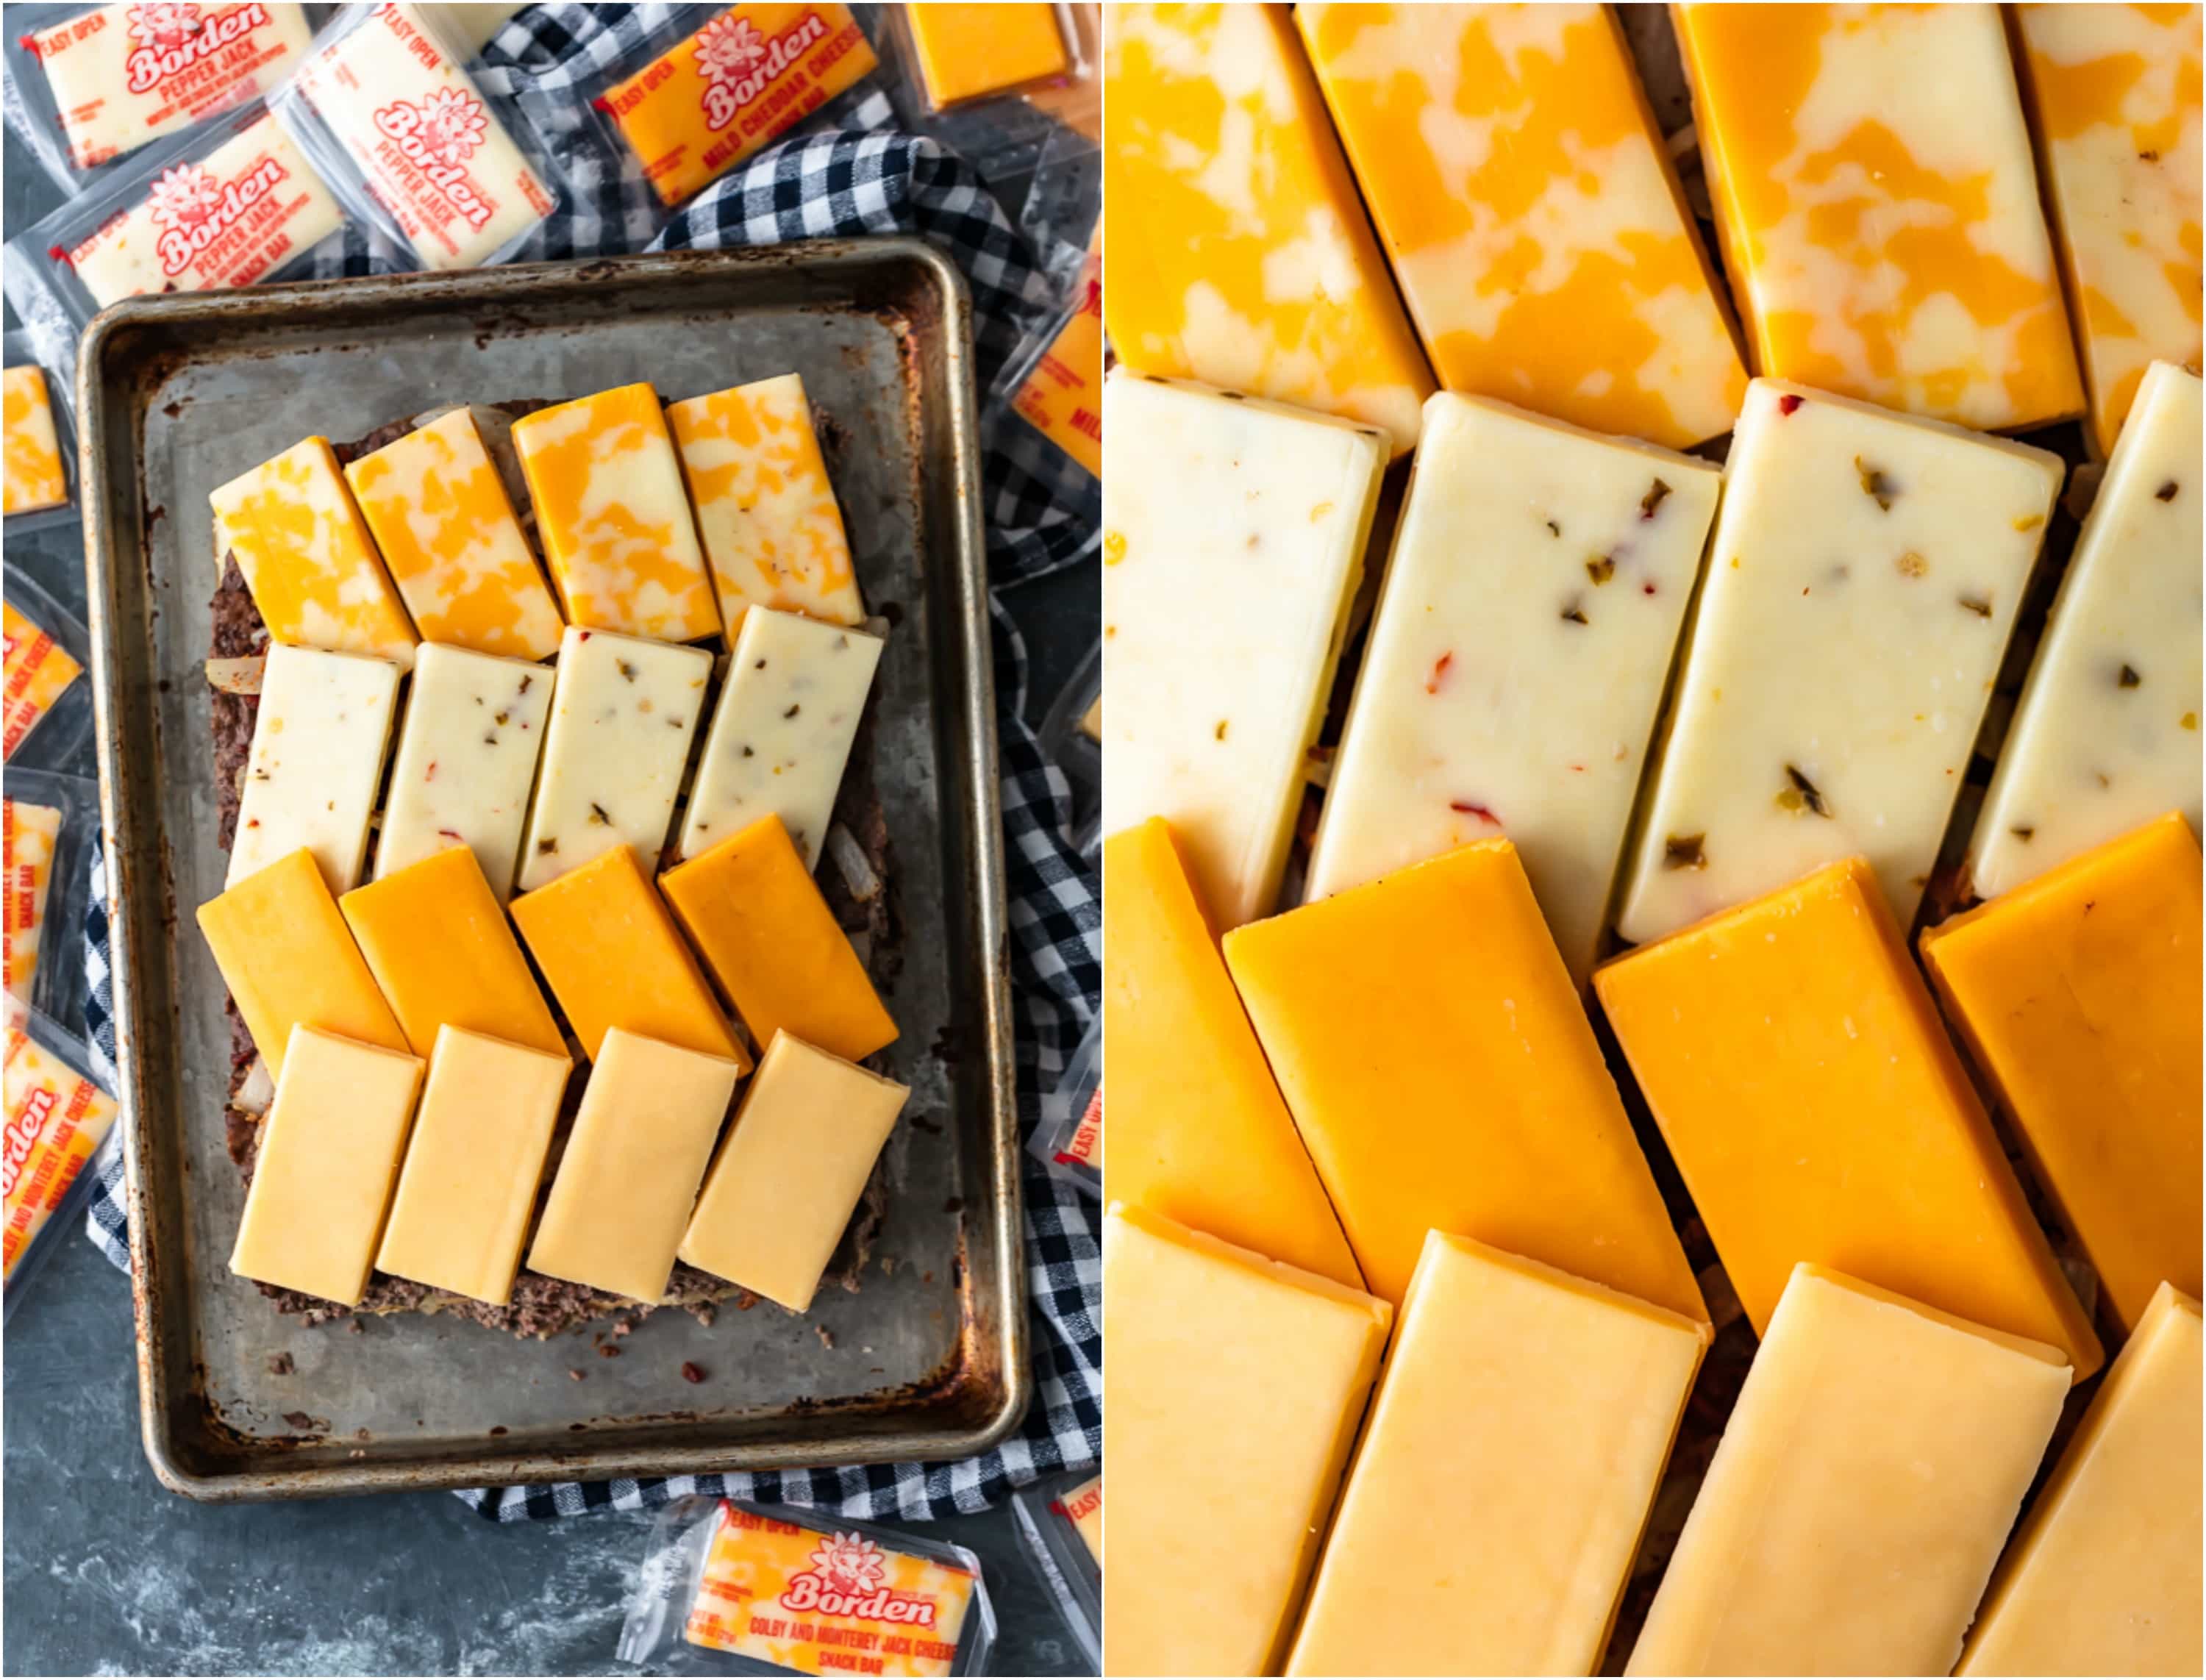 slices of cheese arranged on a baking sheet